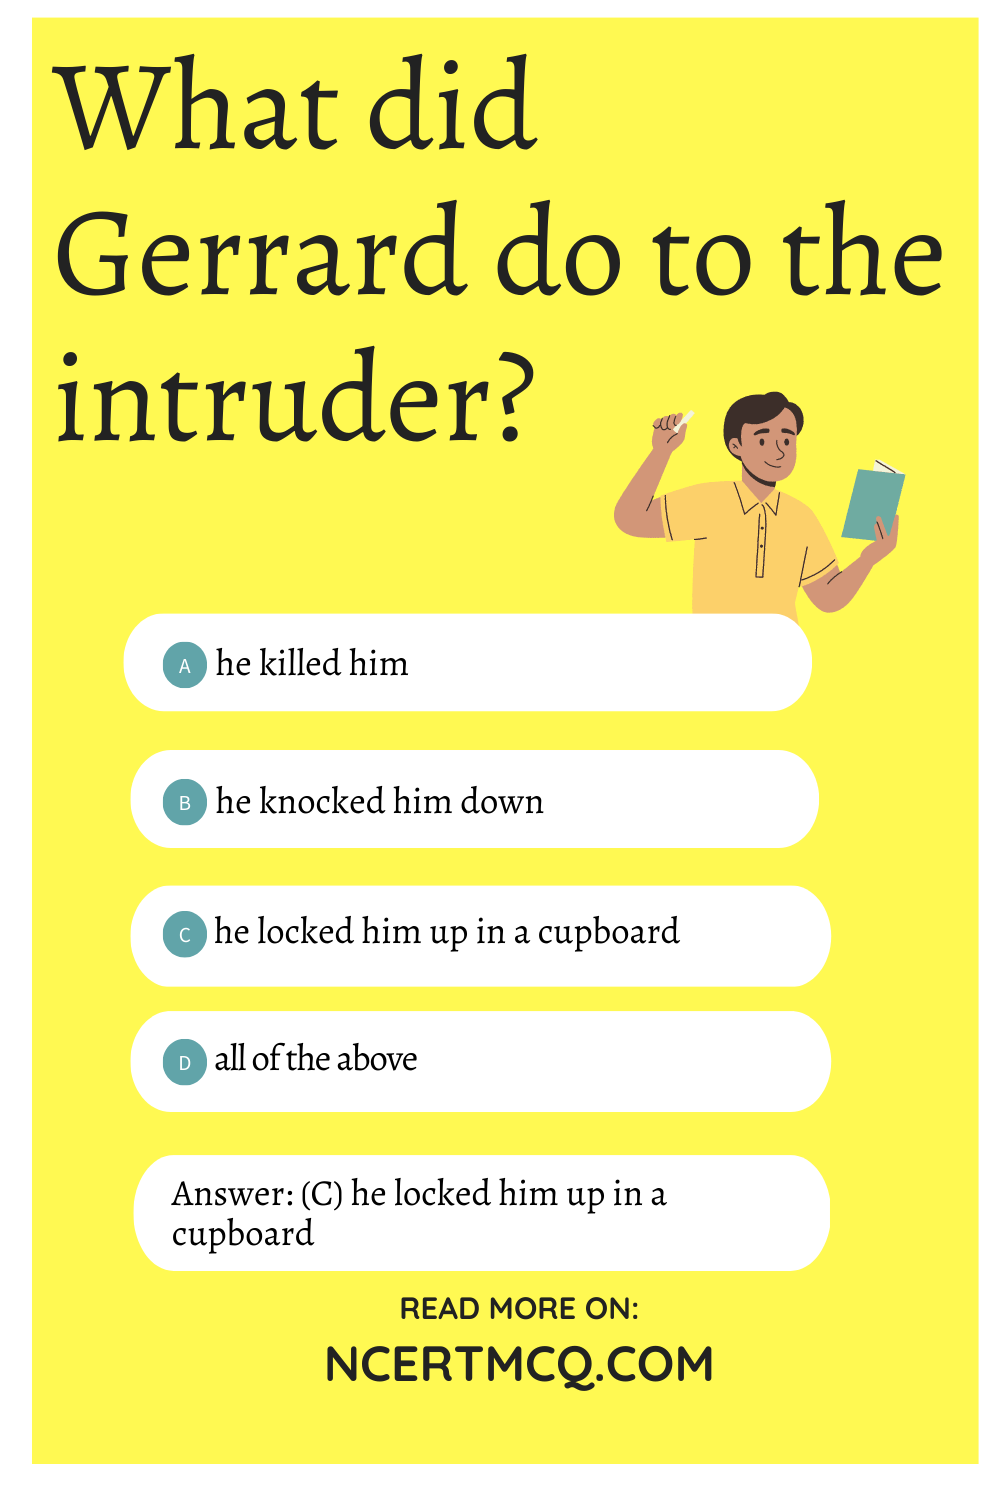 What did Gerrard do to the intruder?